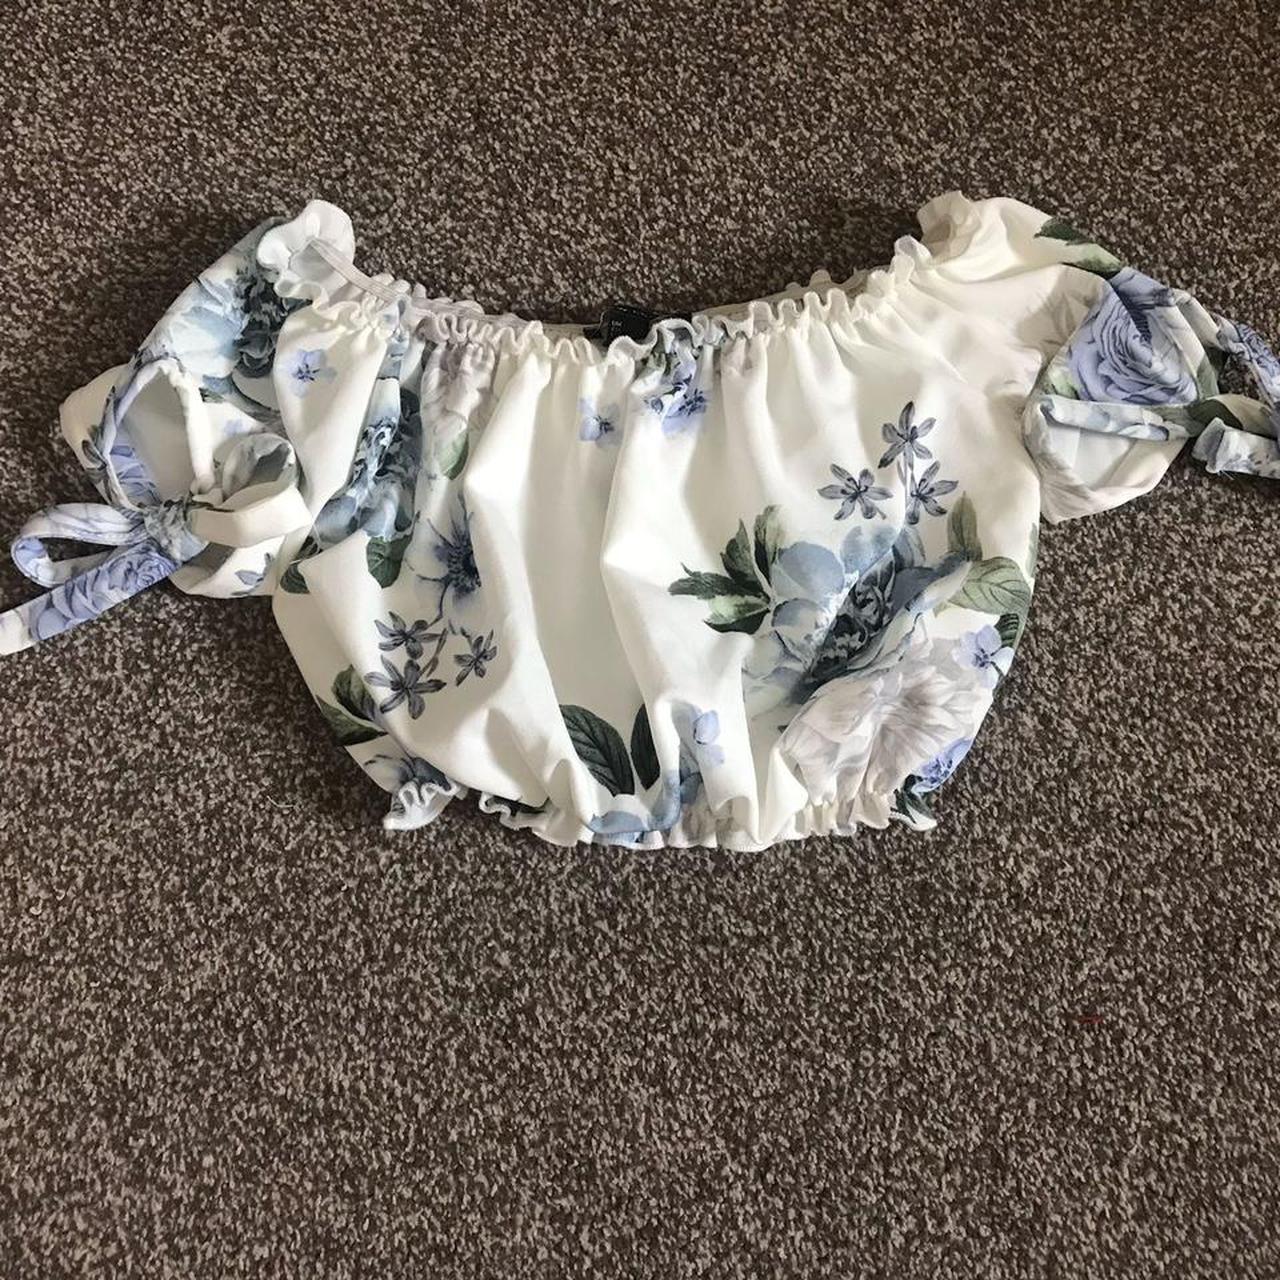 Product Image 1 - Ladies NWOT flower crop top
From